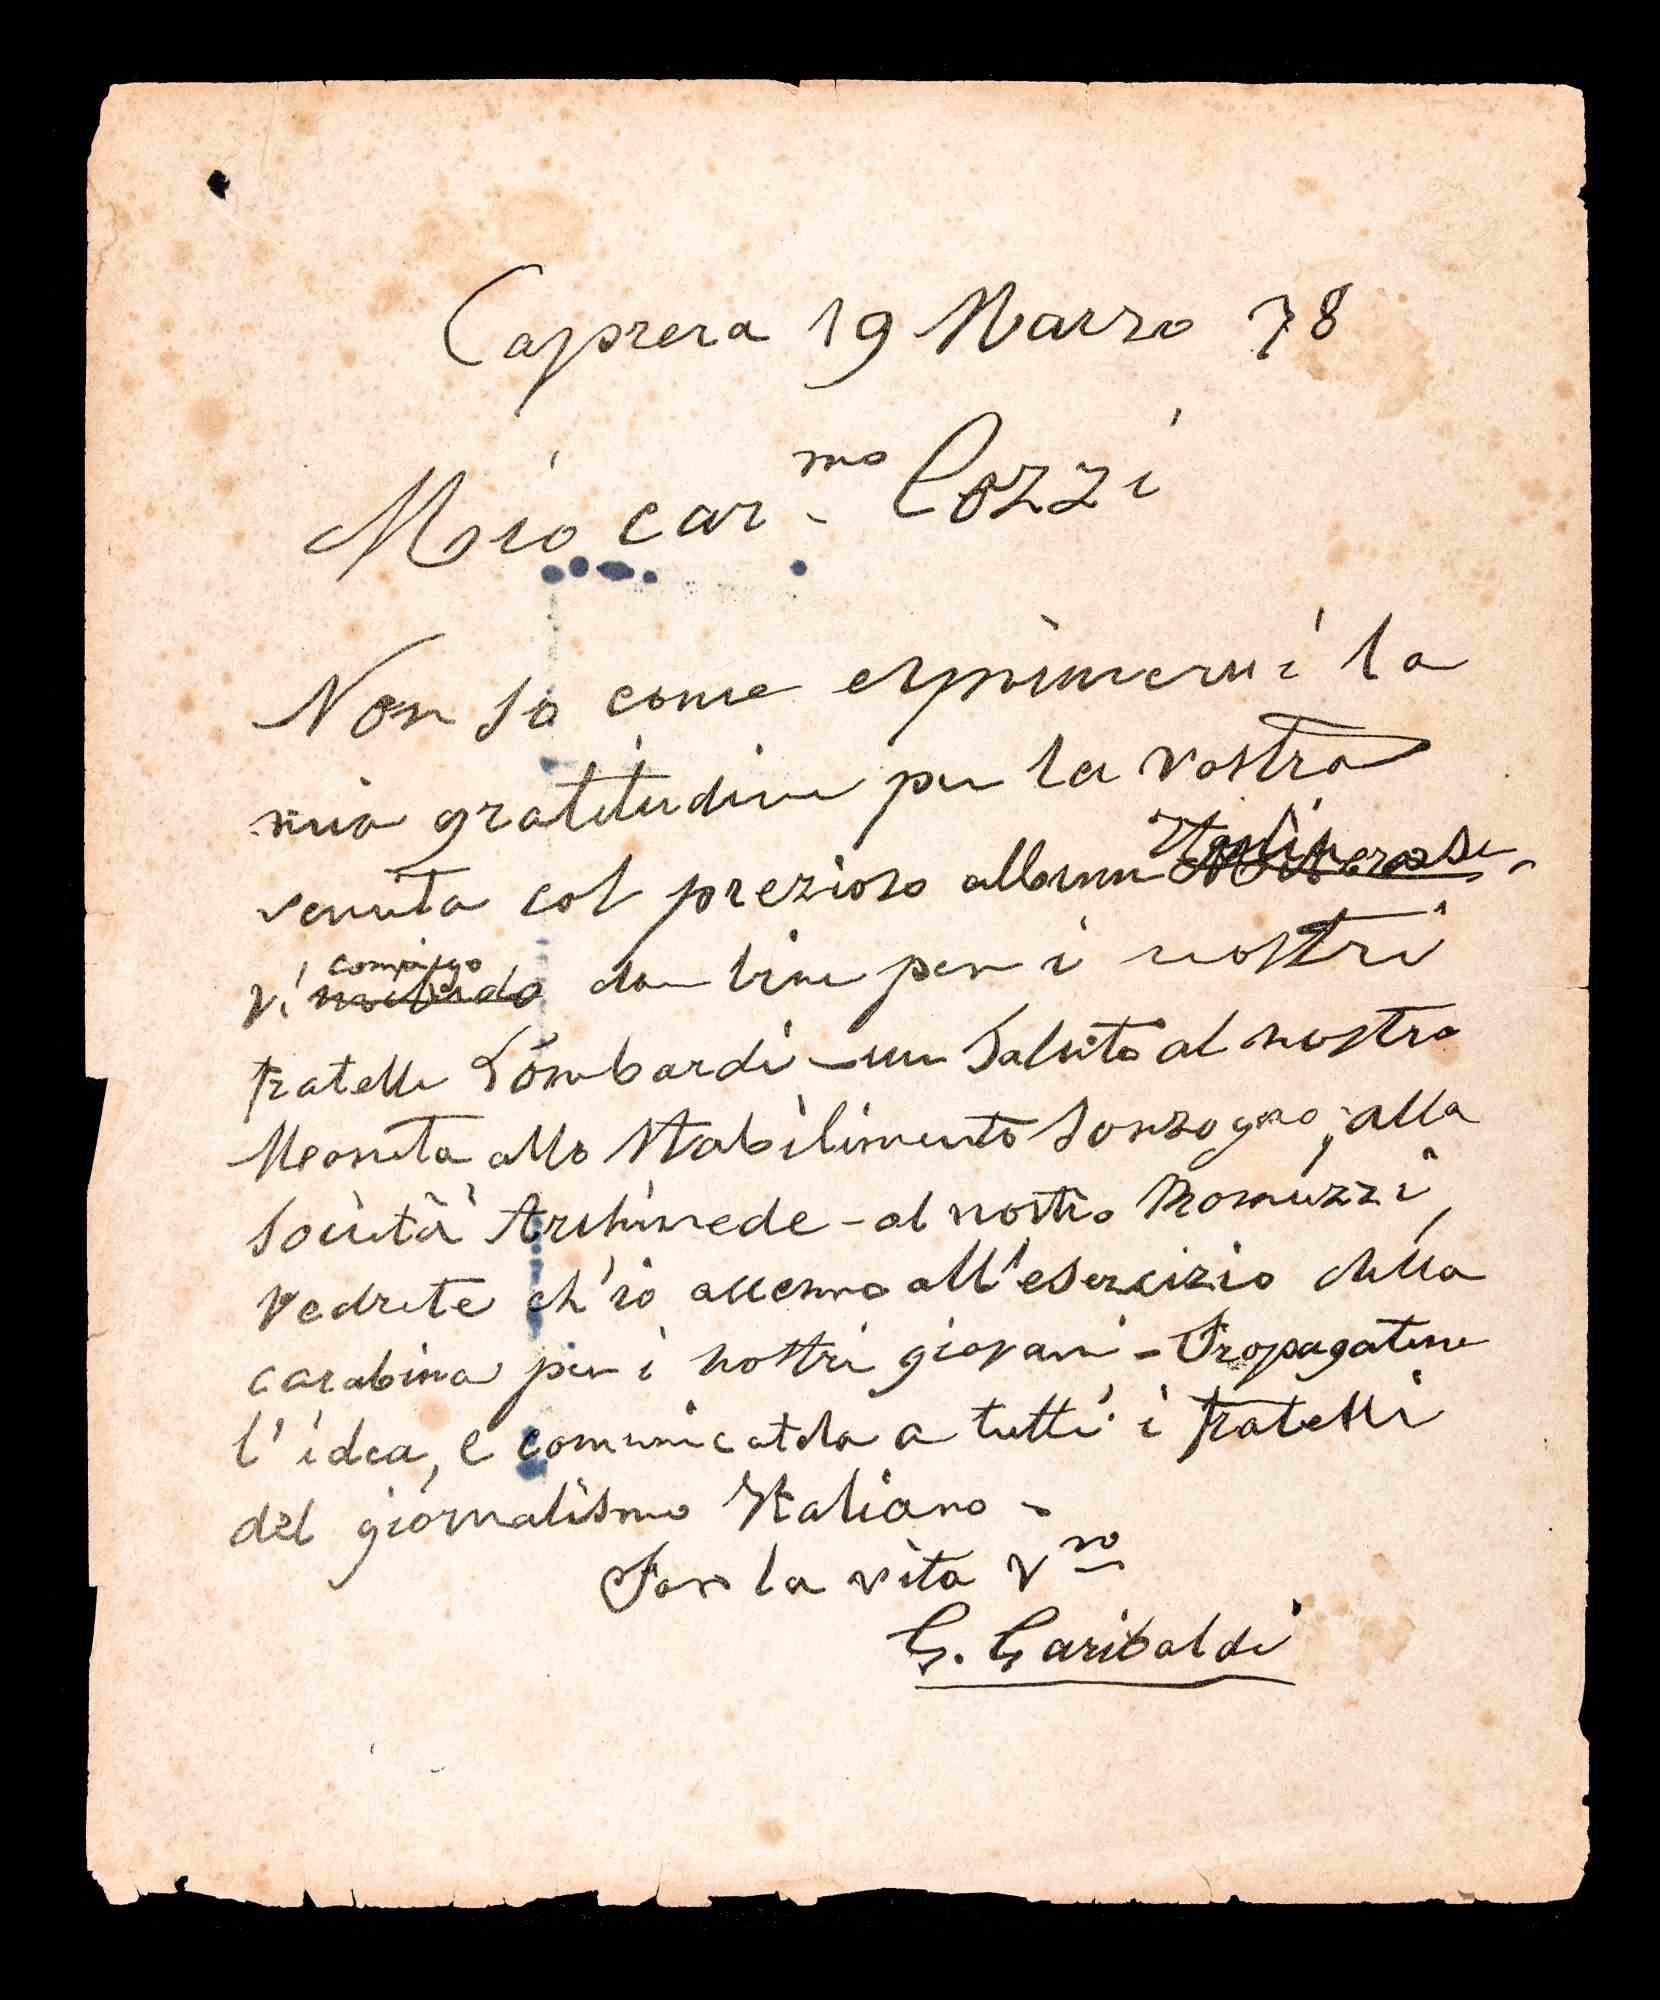 Original letter written by Giuseppe Garibaldi, signed lower right and dated Caprera, 19 March 1878.

He is probably addressing one of his "partisan brothers" showing great gratitude and urging him to give news (?) "to all the brothers of journalism